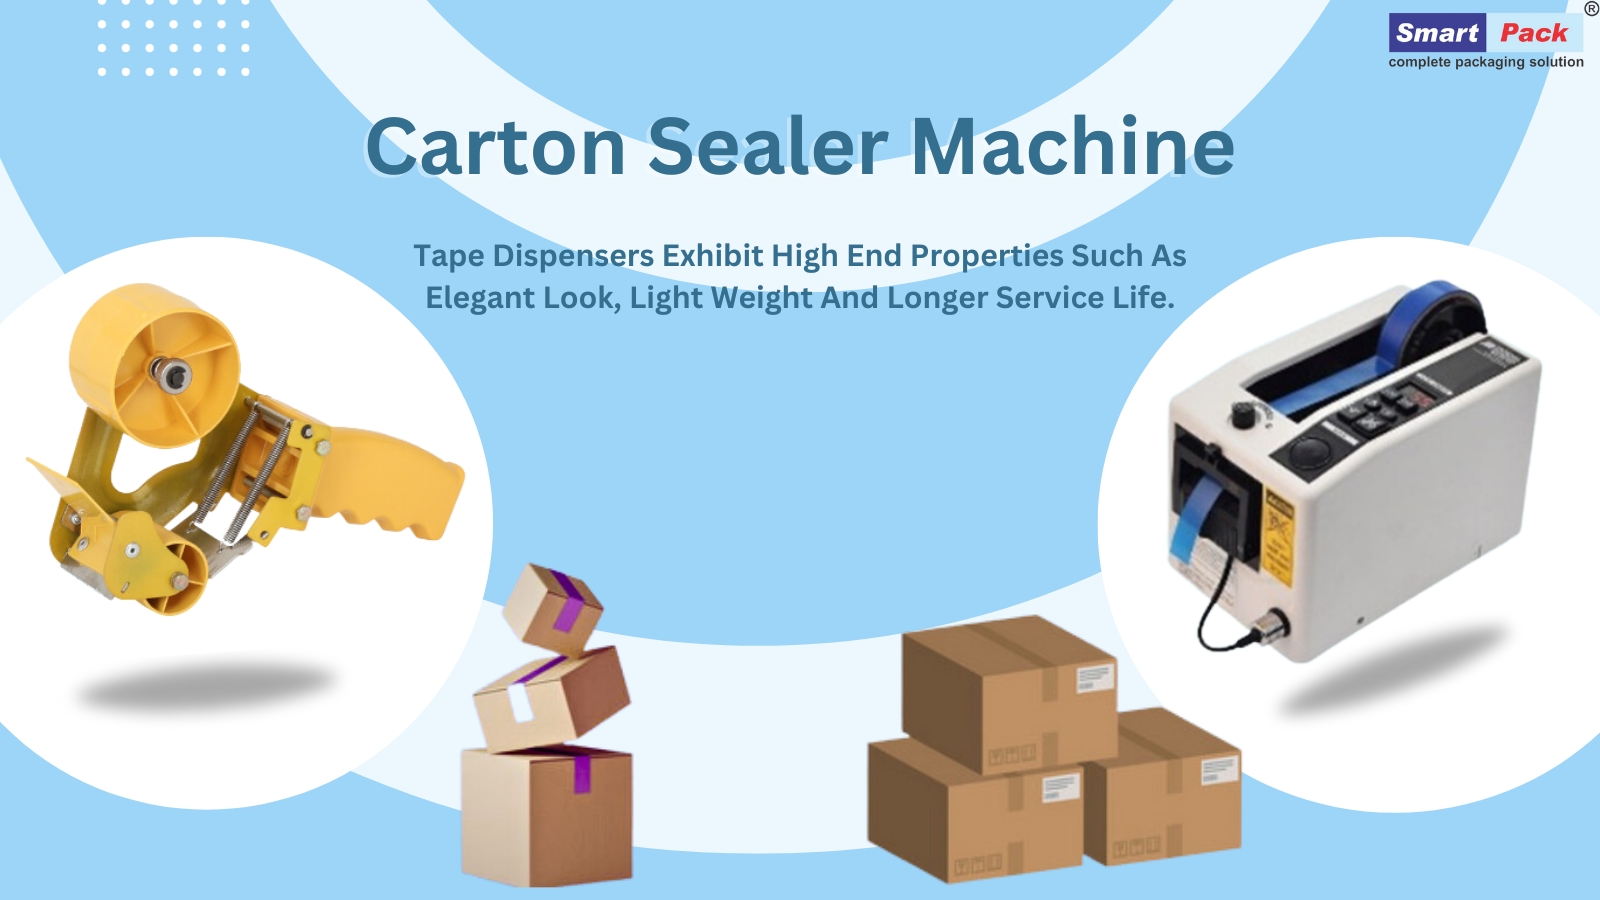 Discover the Power of Carton Sealing: Smart Pack’s innovative Solutions